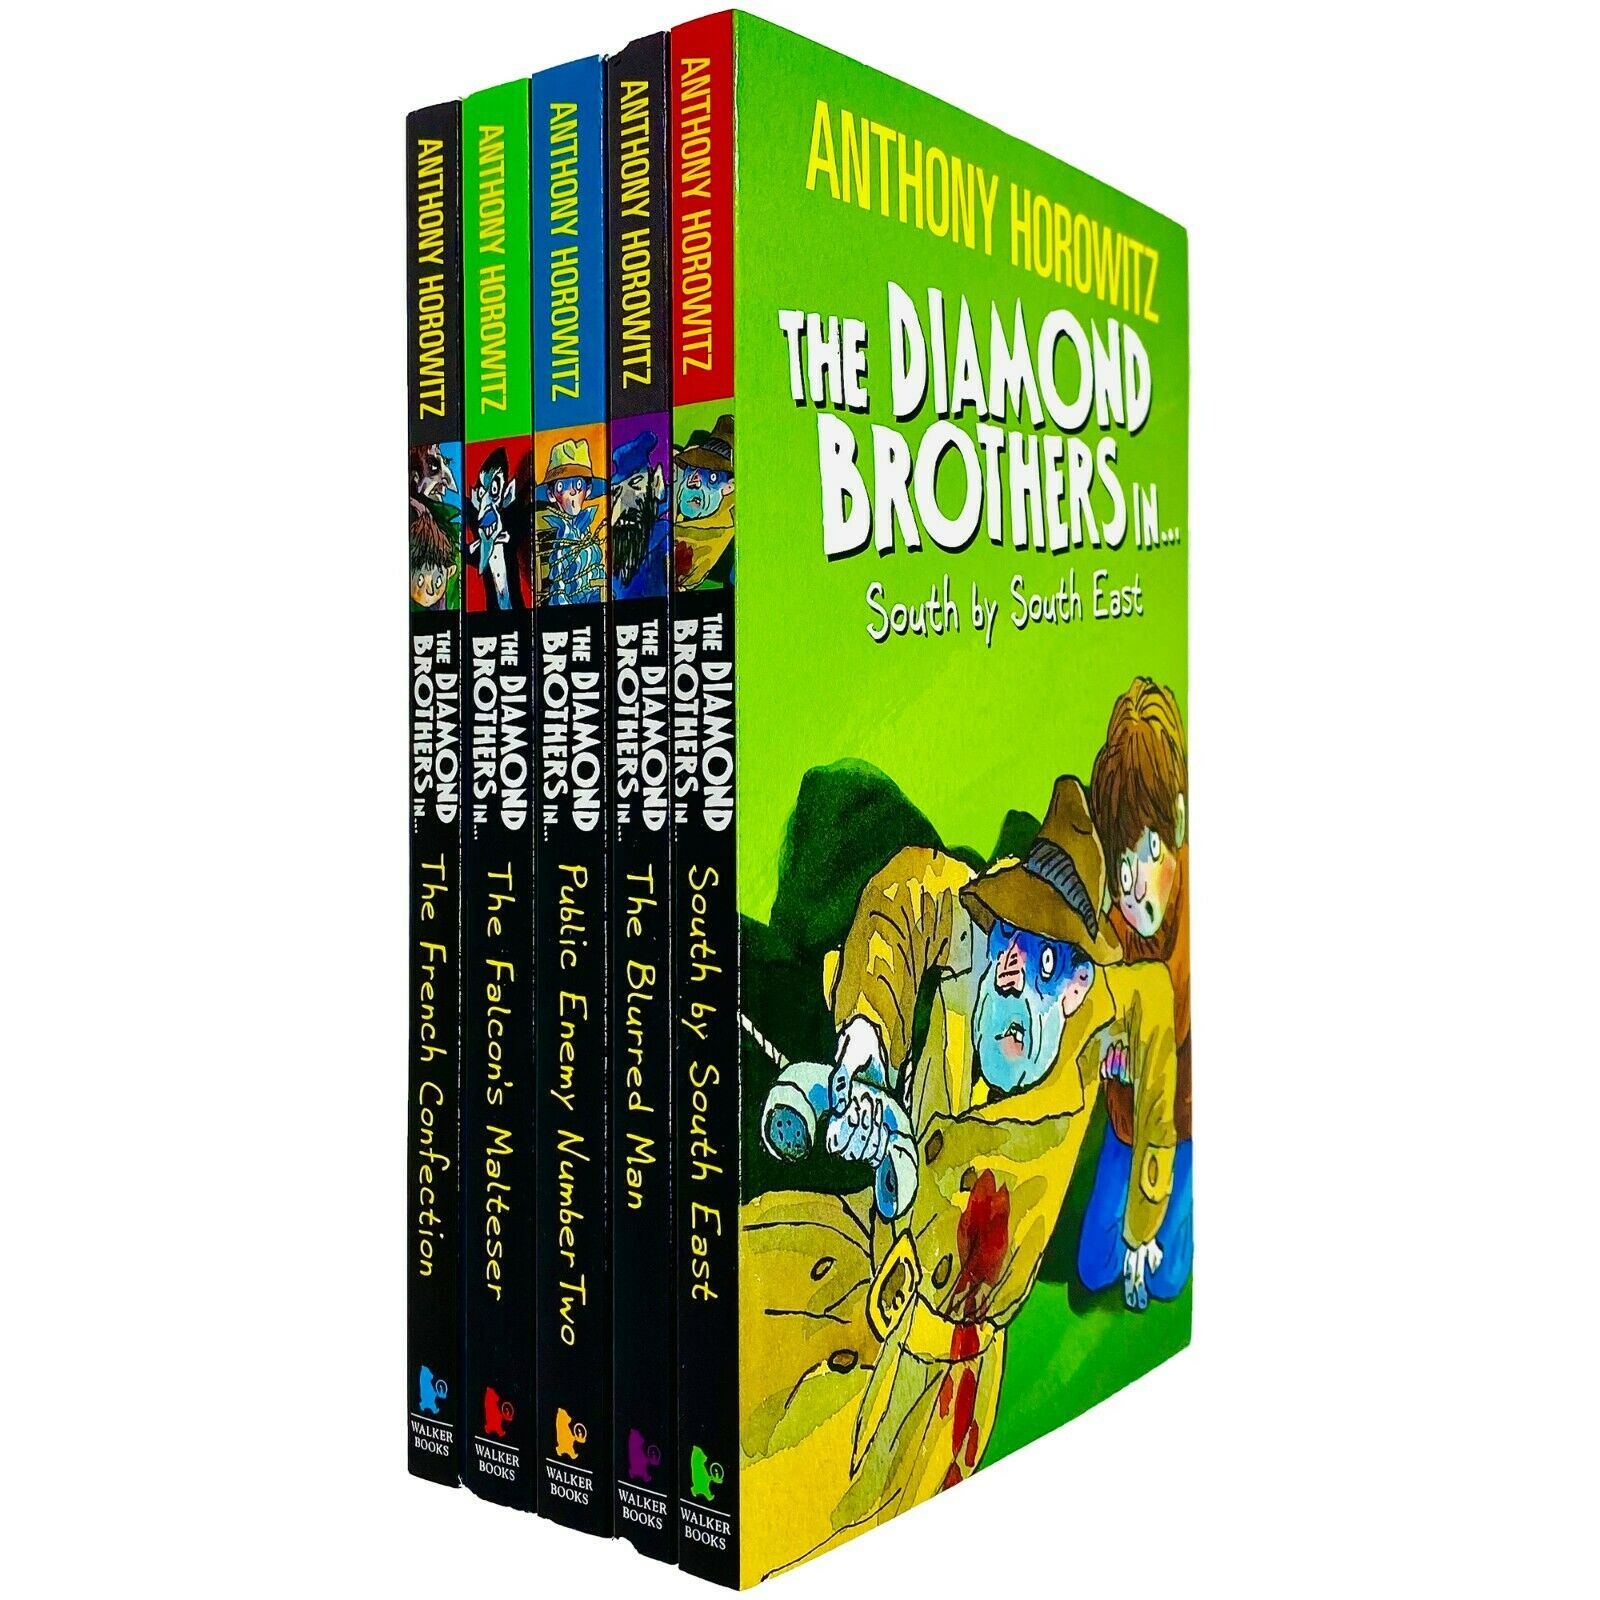 The Diamond Brothers Series 5 Books Collection Set by Anthony Horowitz Paperback - Lets Buy Books